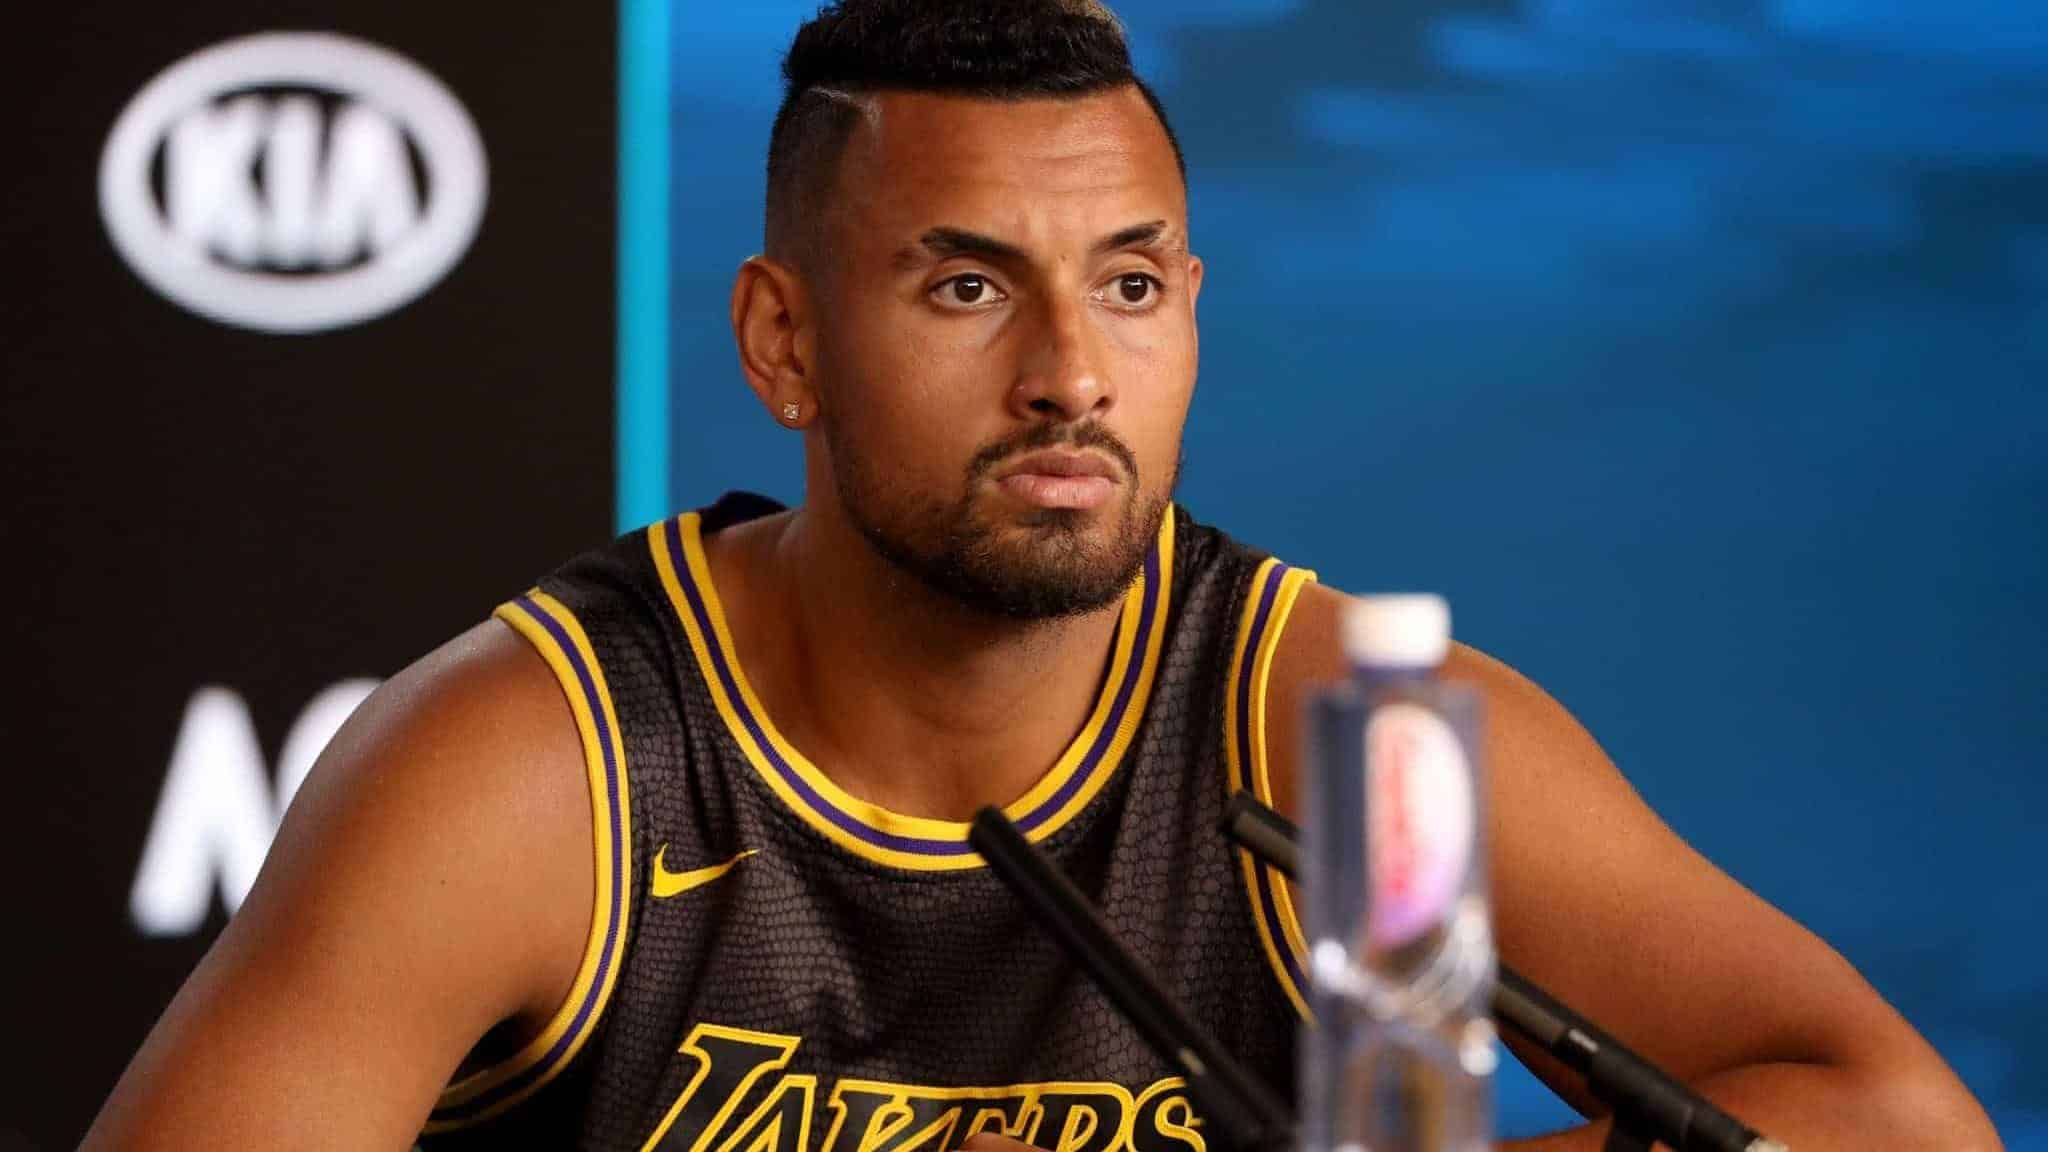 MELBOURNE, AUSTRALIA - JANUARY 27: Nick Kyrgios of Australia speaks at his post match press conference on day eight of the 2020 Australian Open at Melbourne Park on January 27, 2020 in Melbourne, Australia.